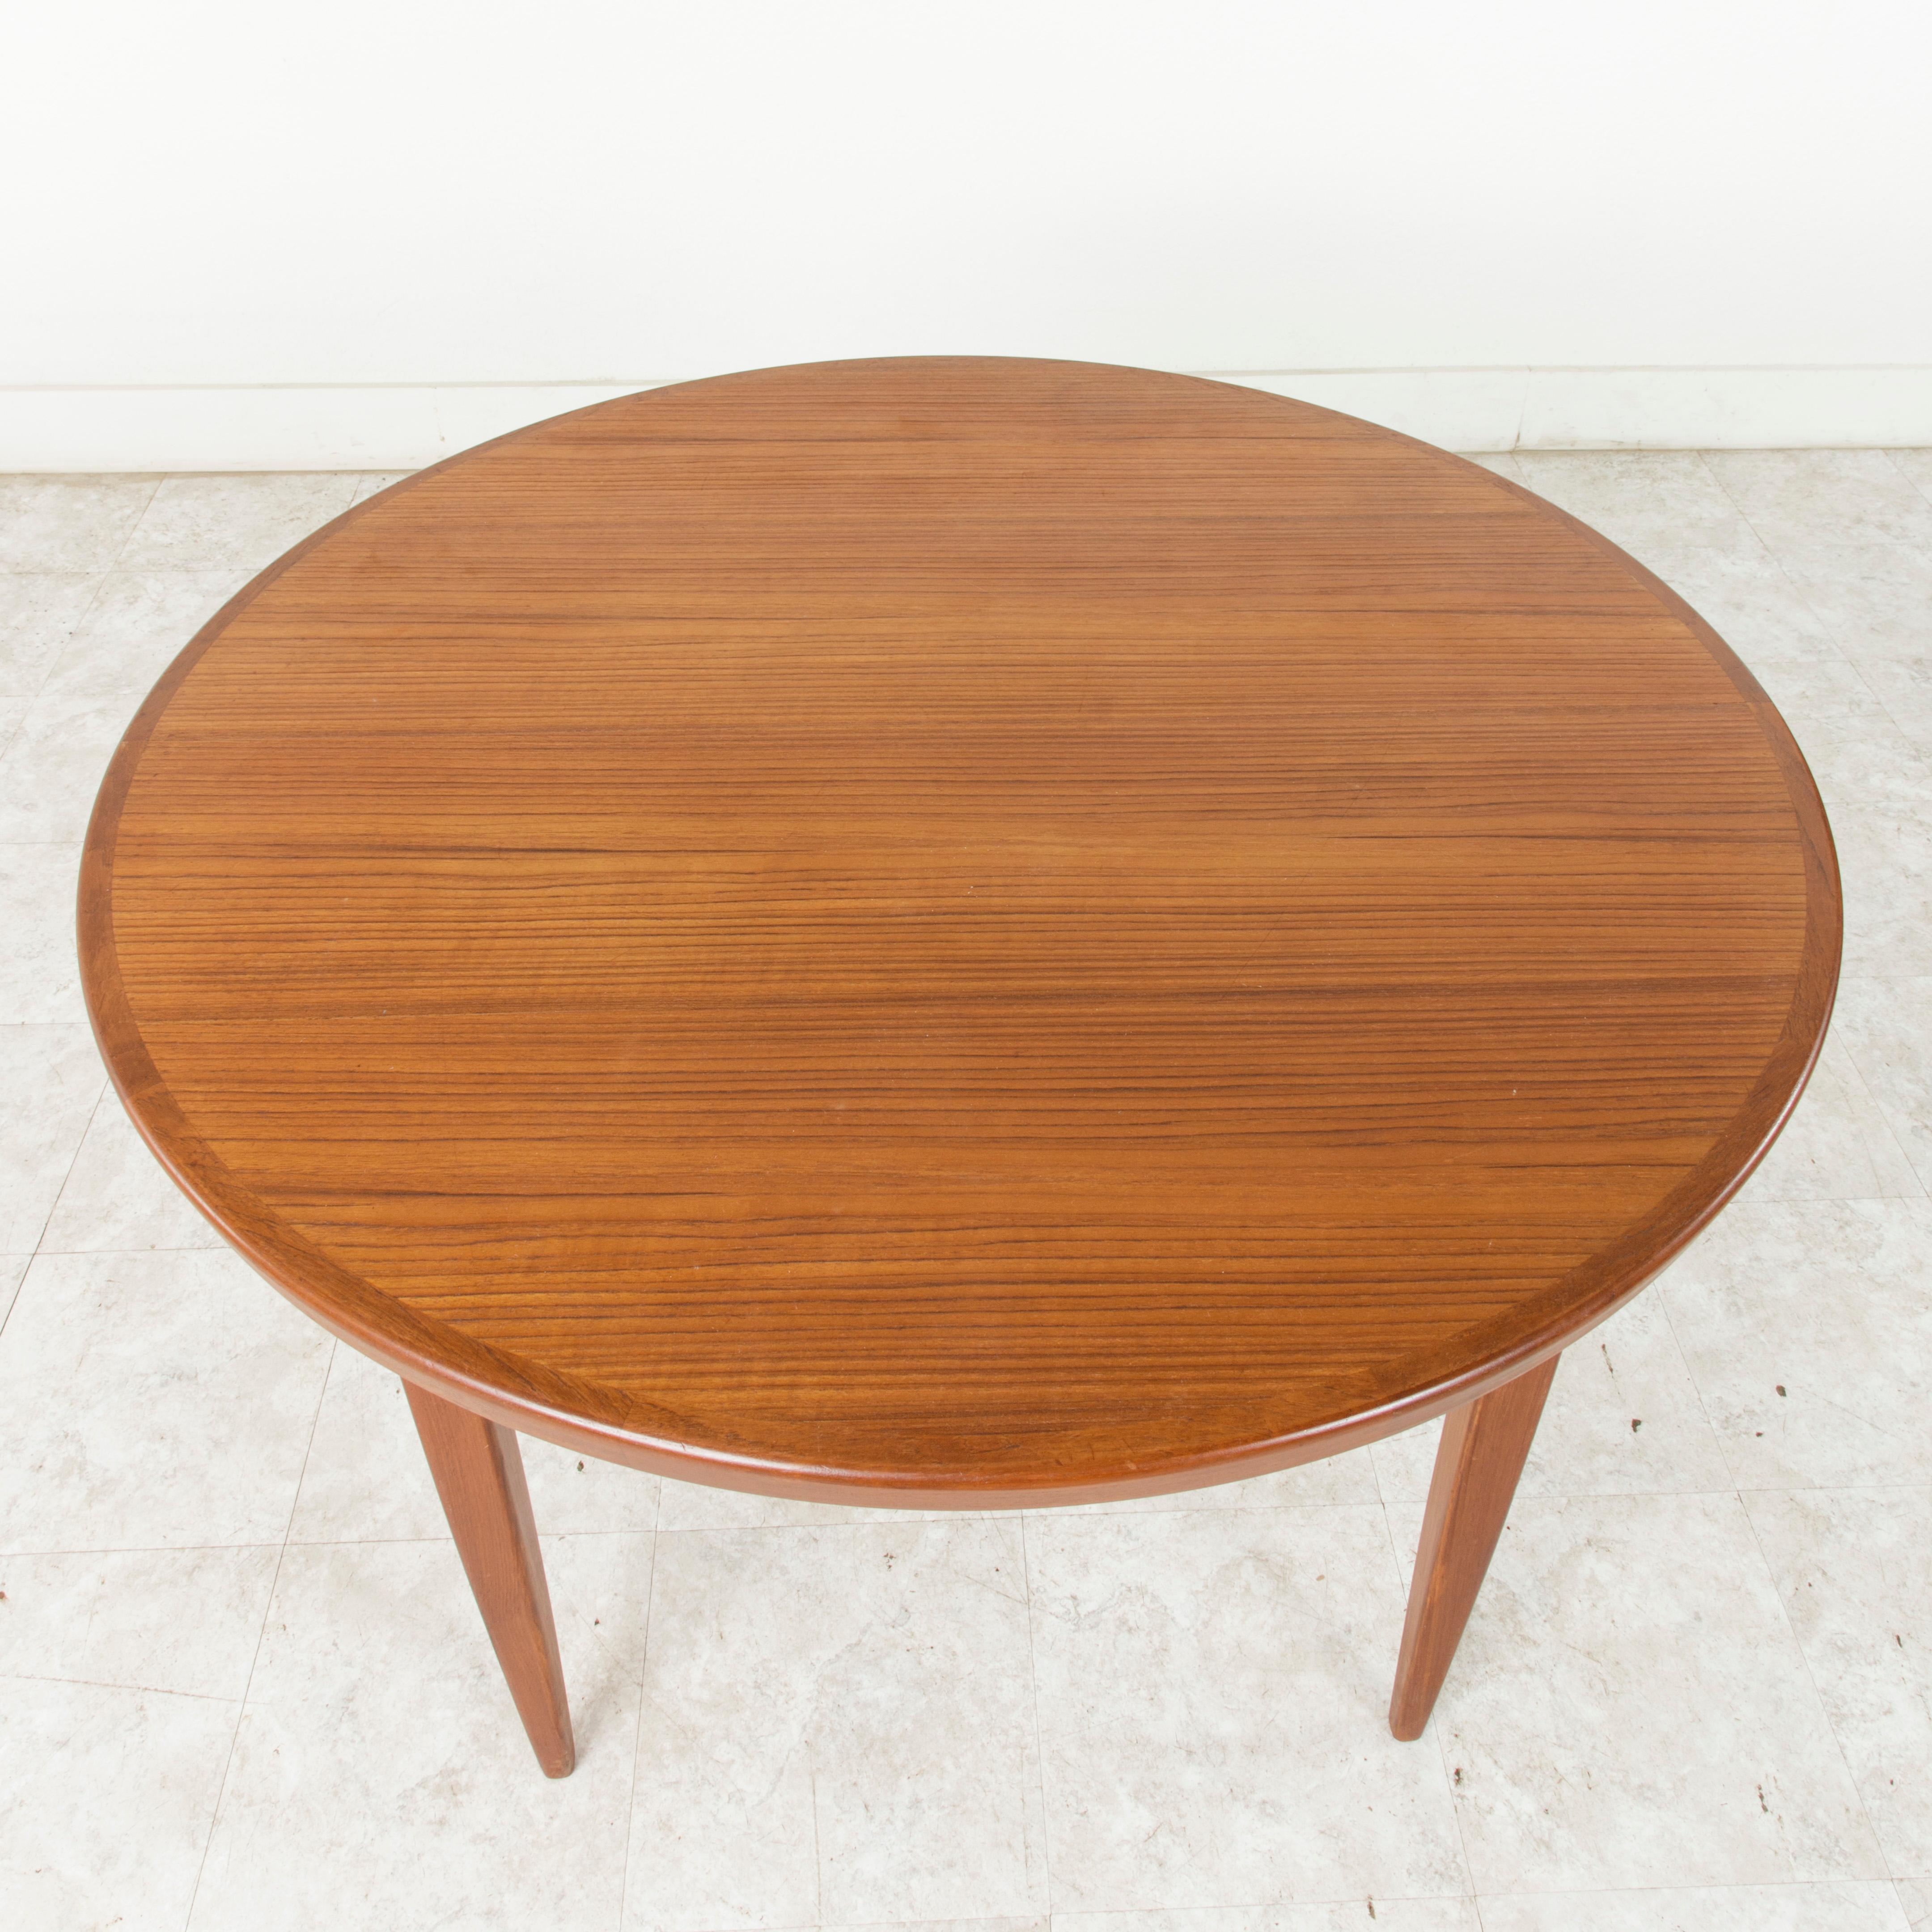 Mid-20th Century Midcentury Danish Round Teak Table and Four Chairs by Niels Koefoed, Hornslet